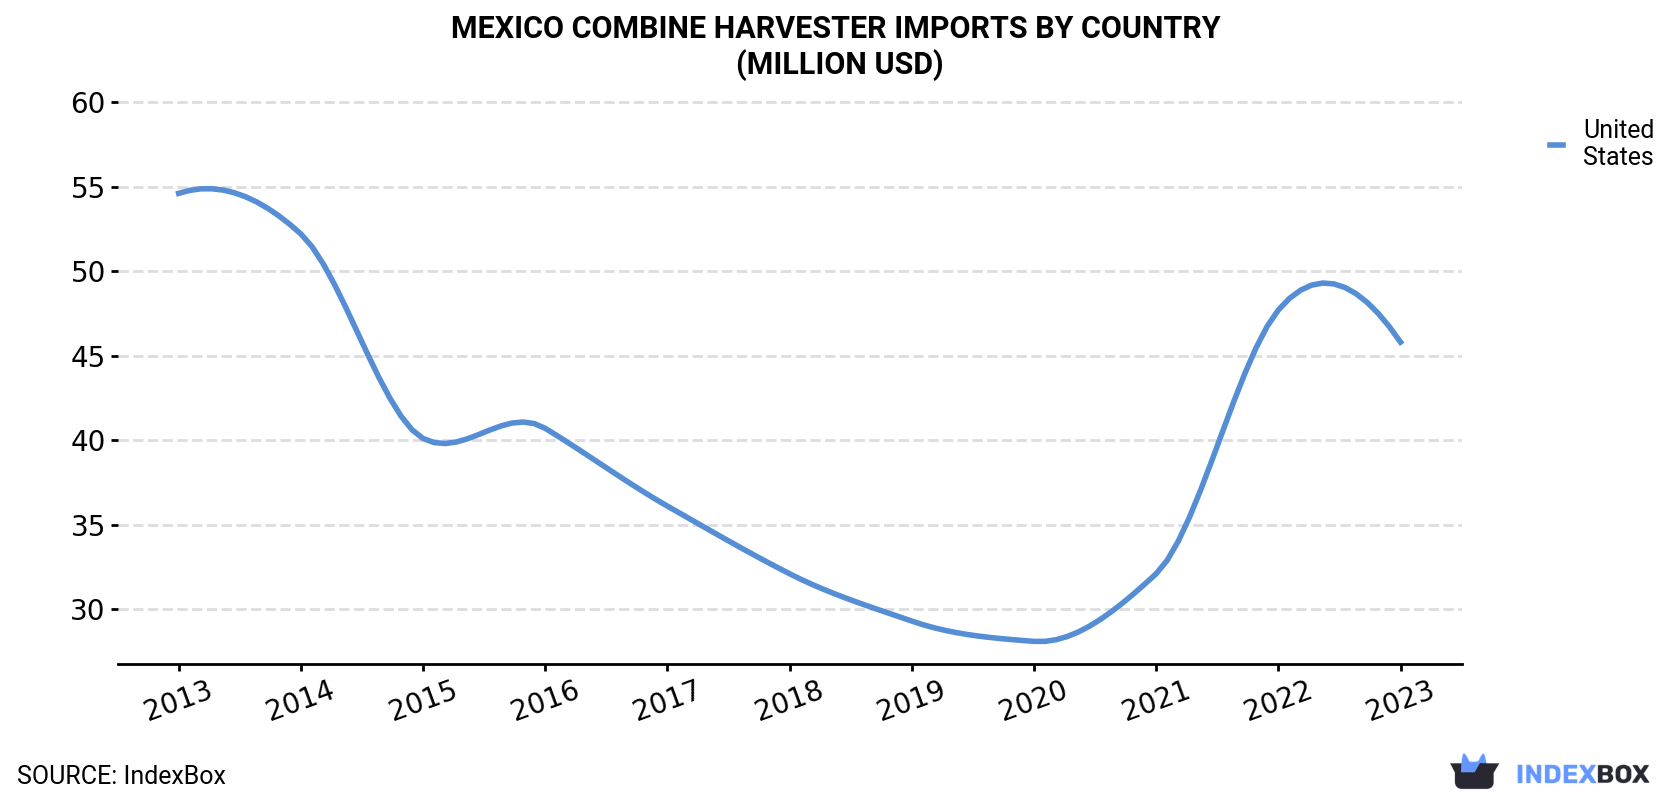 Mexico Combine Harvester Imports By Country (Million USD)